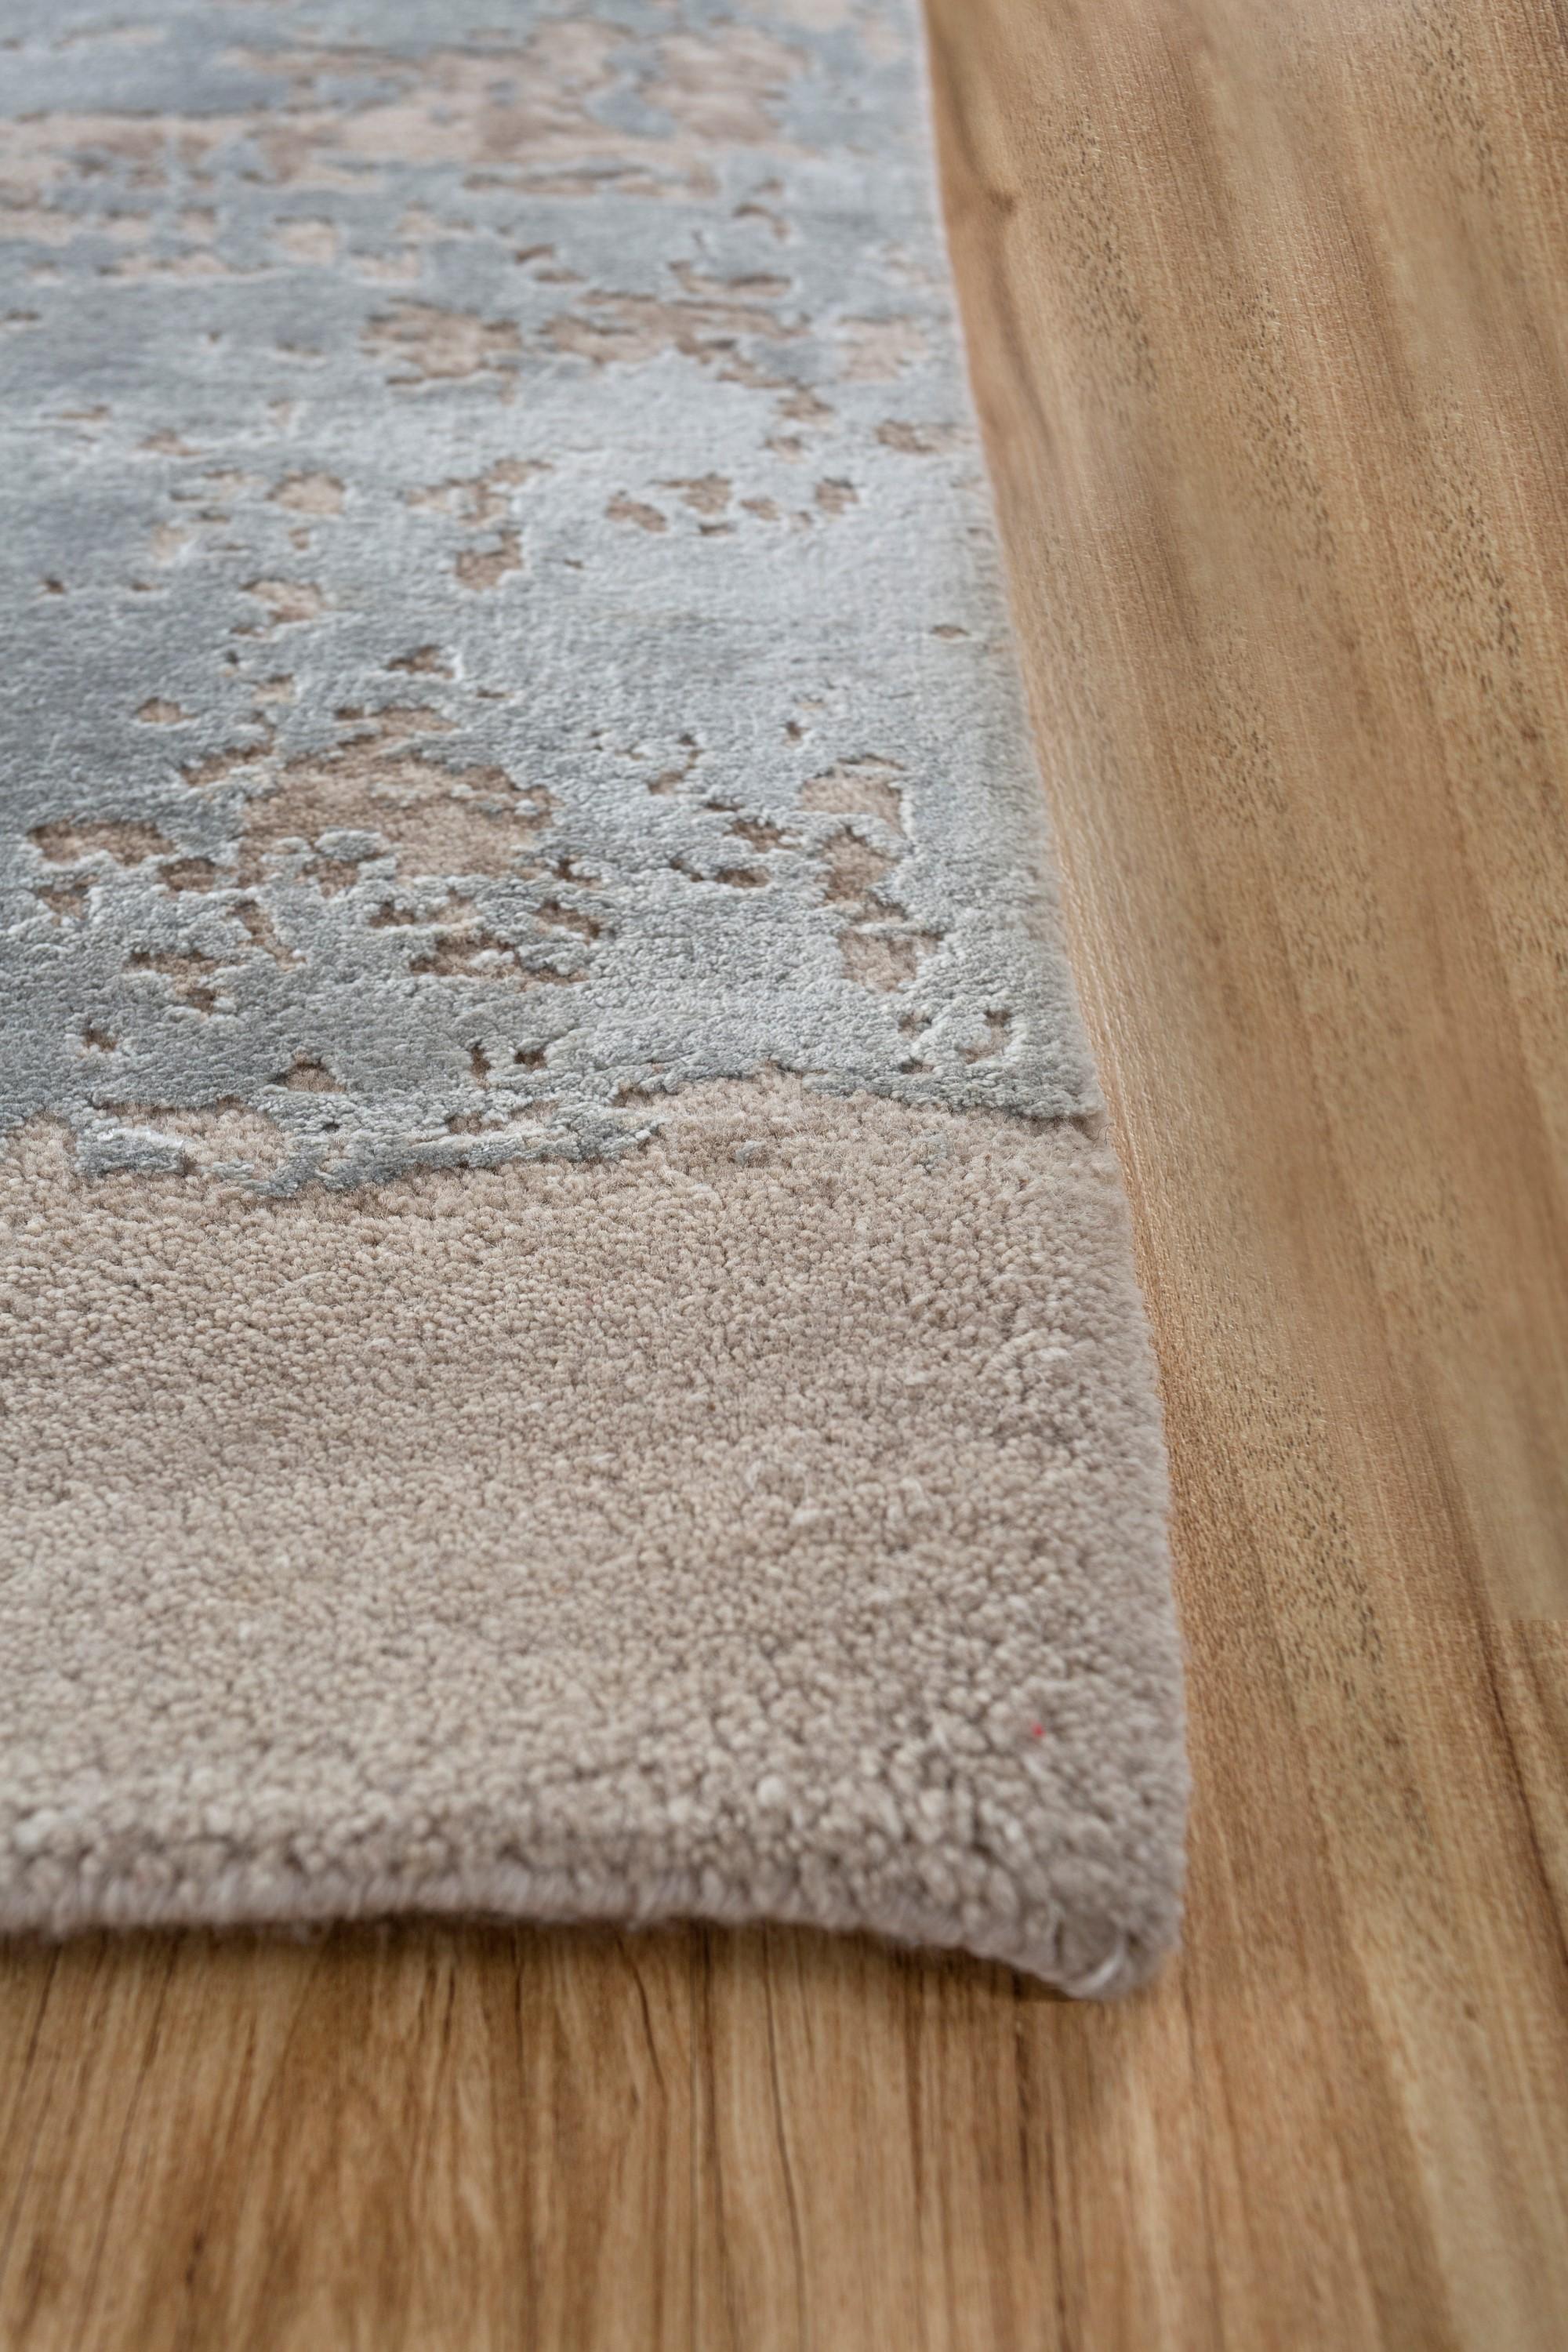 Embark on a serene journey with this hand-knotted rug capturing the essence of the vast sky. Its Caribbean sky ground and antique white border paint a tranquil canvas that invites a moment of pause and reflection. Designed for modern spaces, this